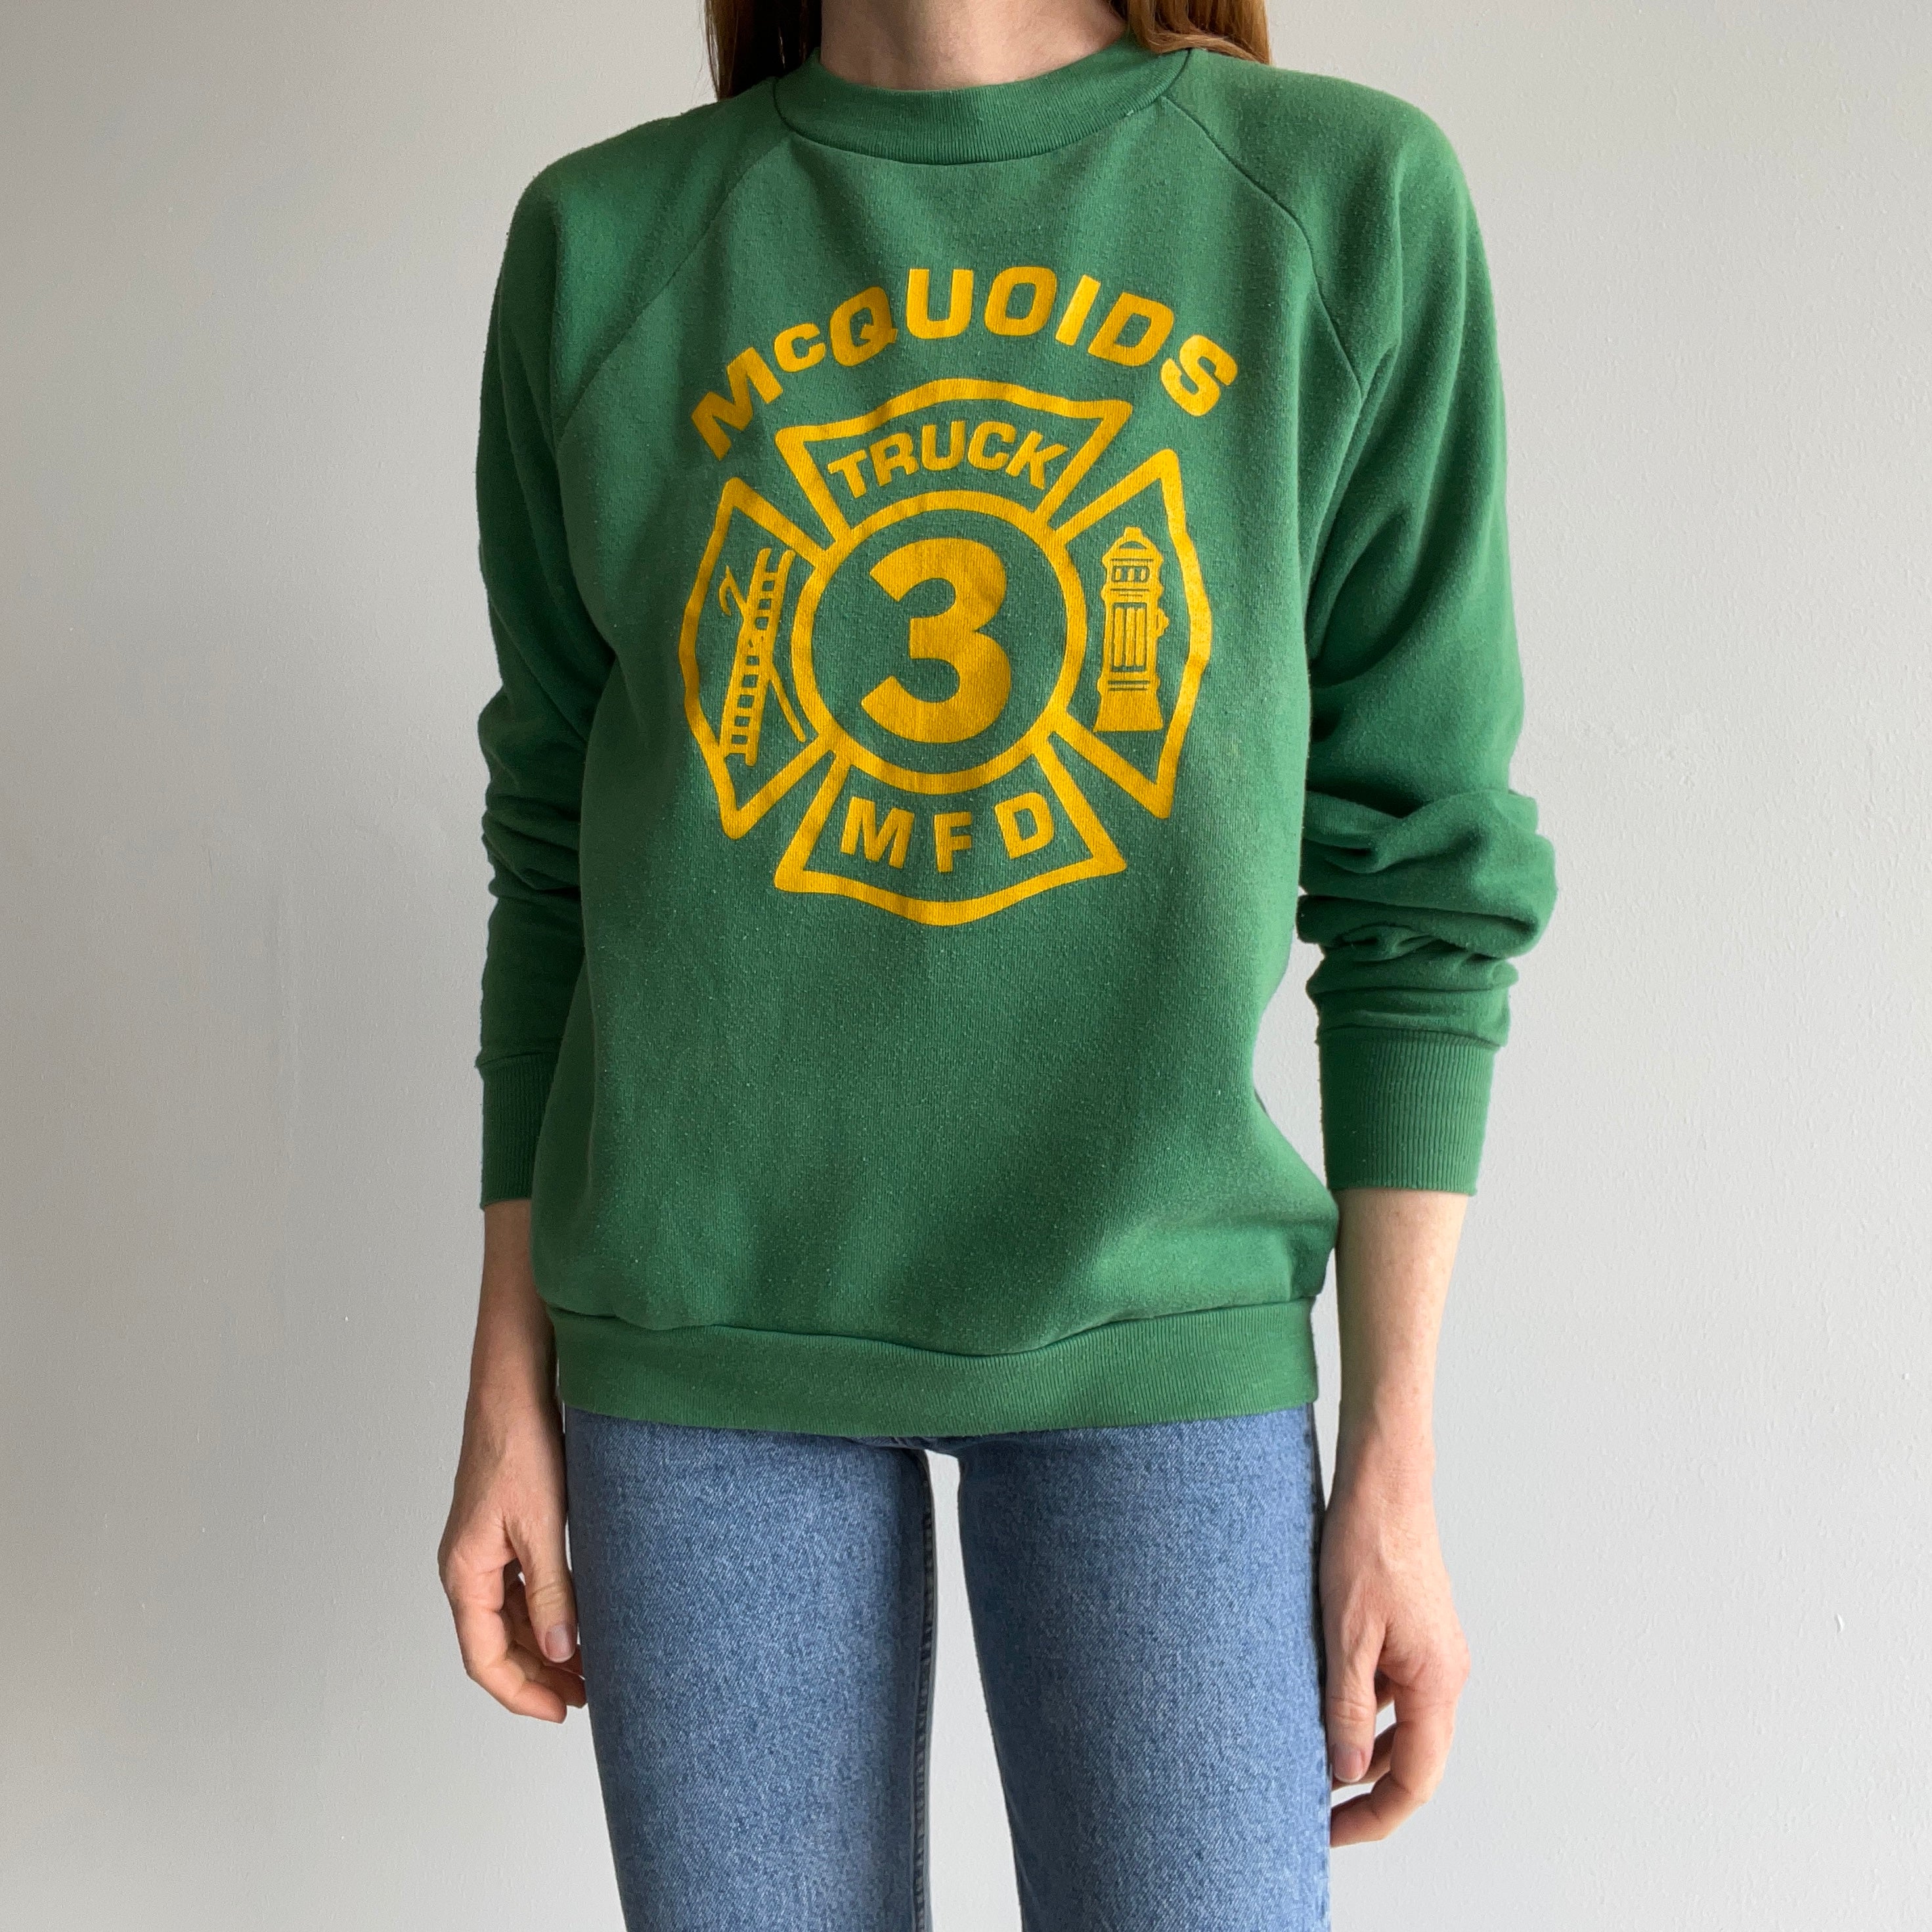 1970s McQuoids Engine and Ladder - Middletown, NY - Sweatshirt